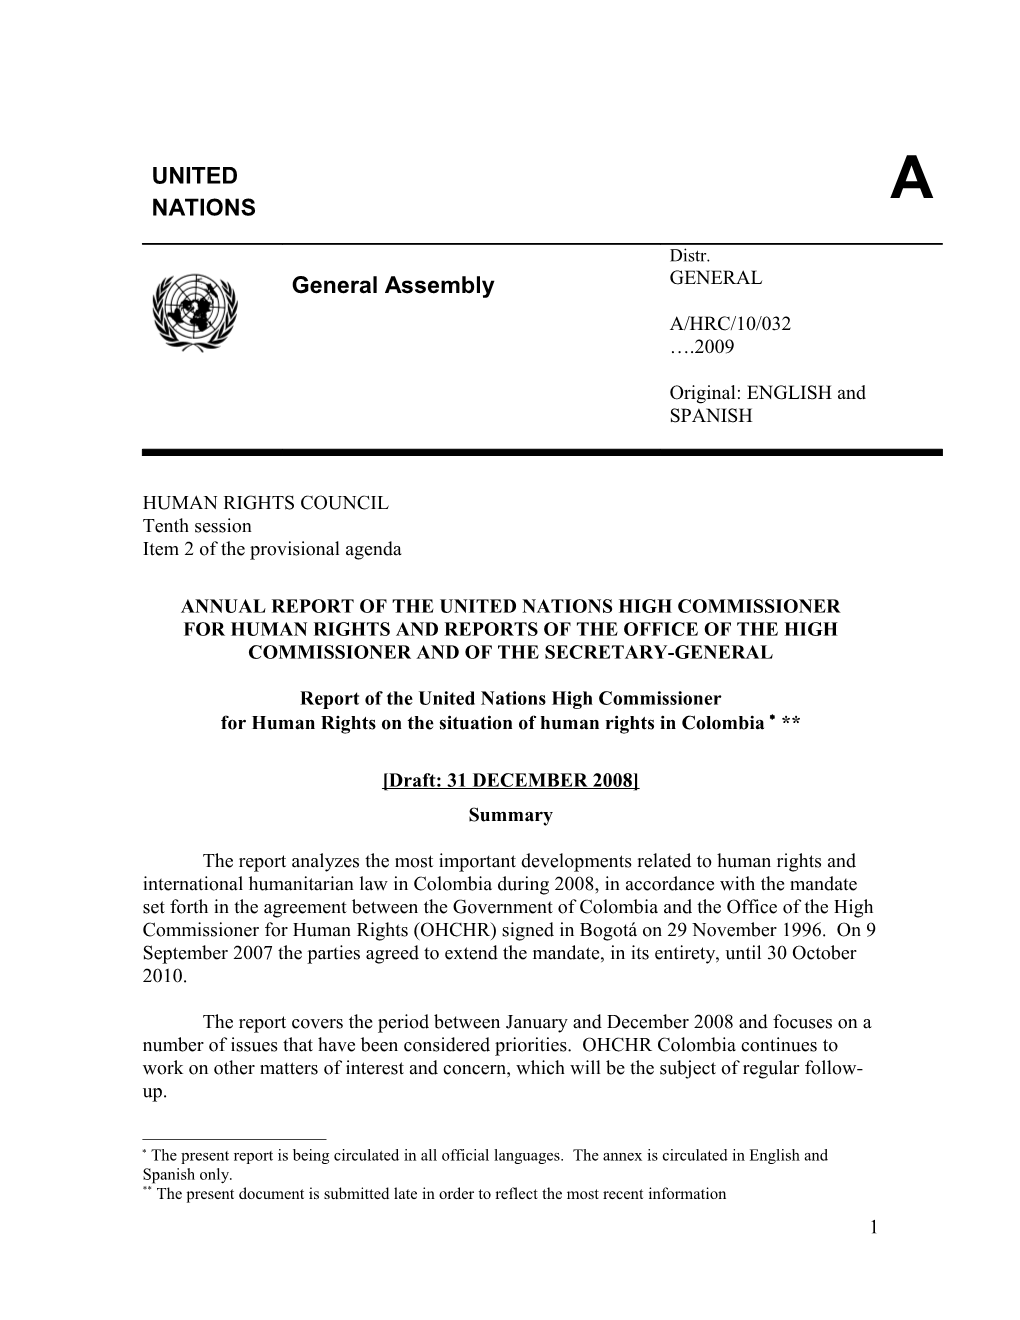 Annual Report of the United Nations High Commissioner